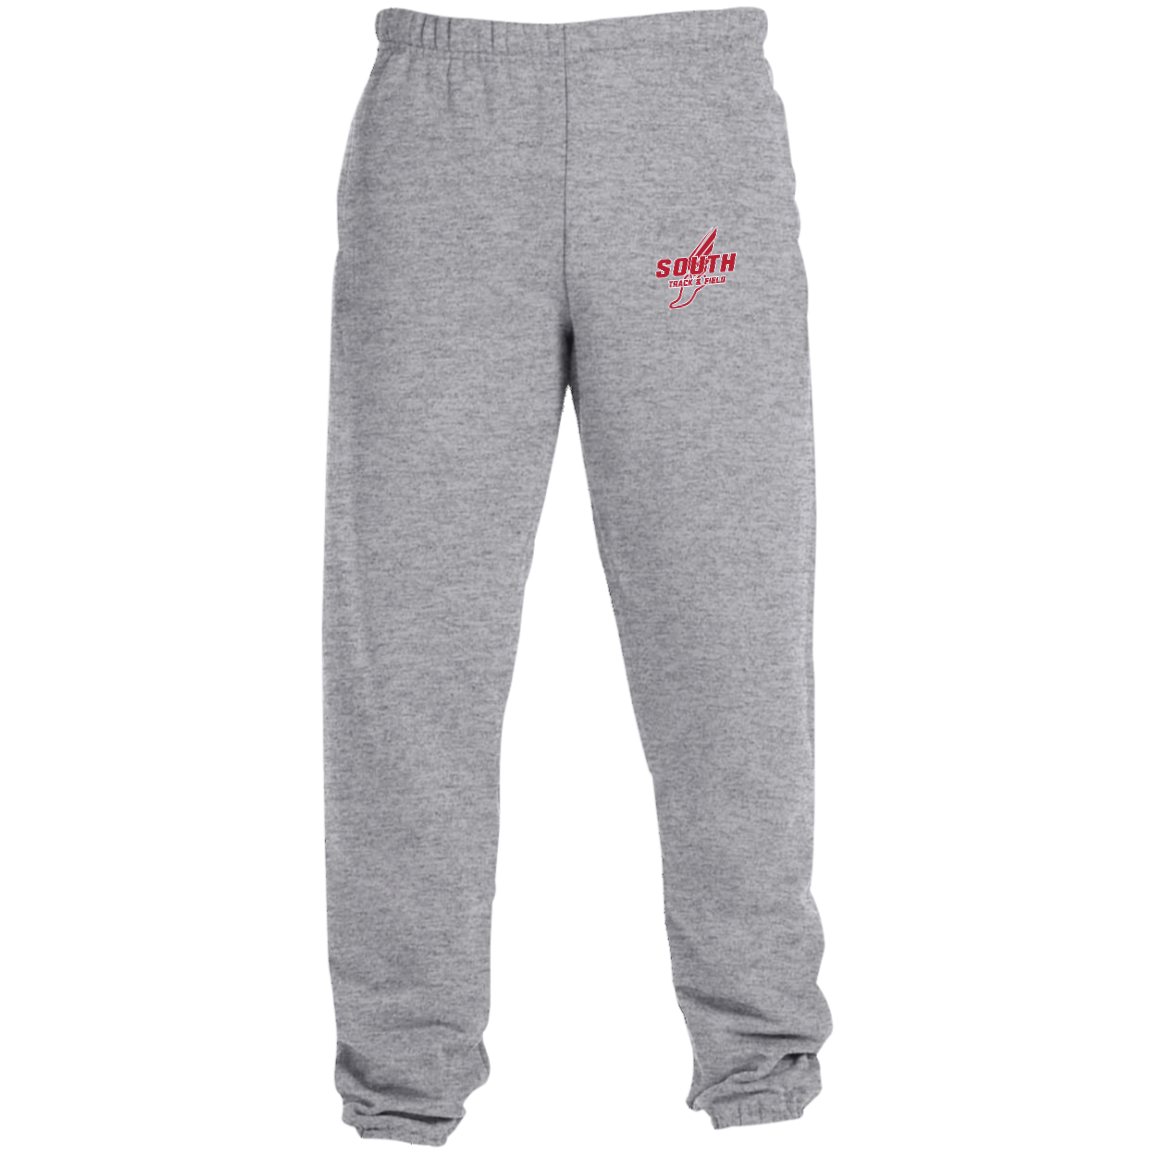 4850MP Sweatpants with Pockets